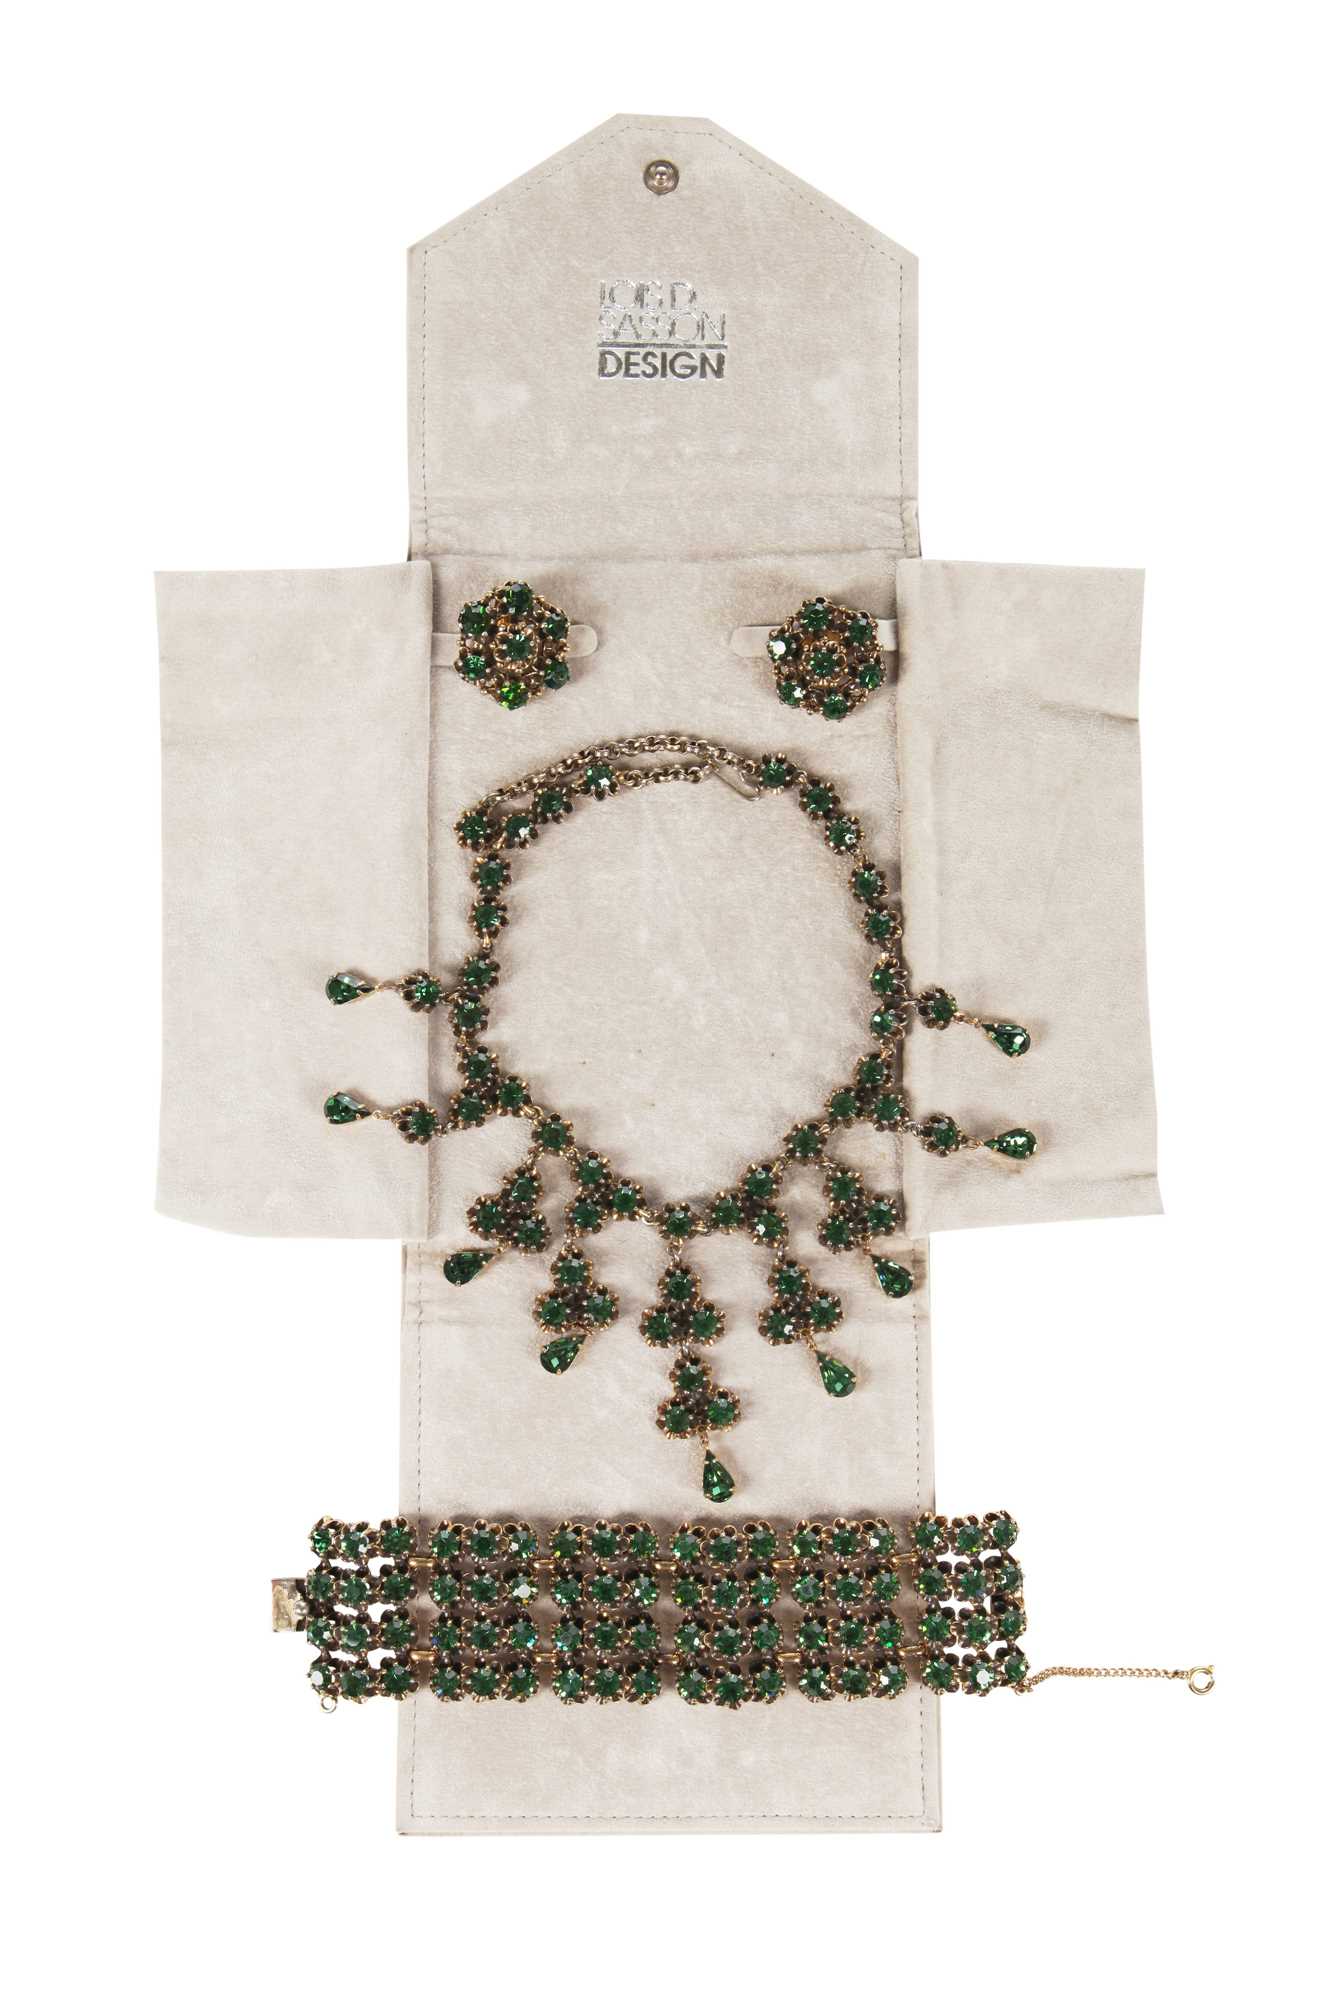 Lot 48 - A Schiaparelli parure of faceted green glass stones, late 1950s-early 1960s